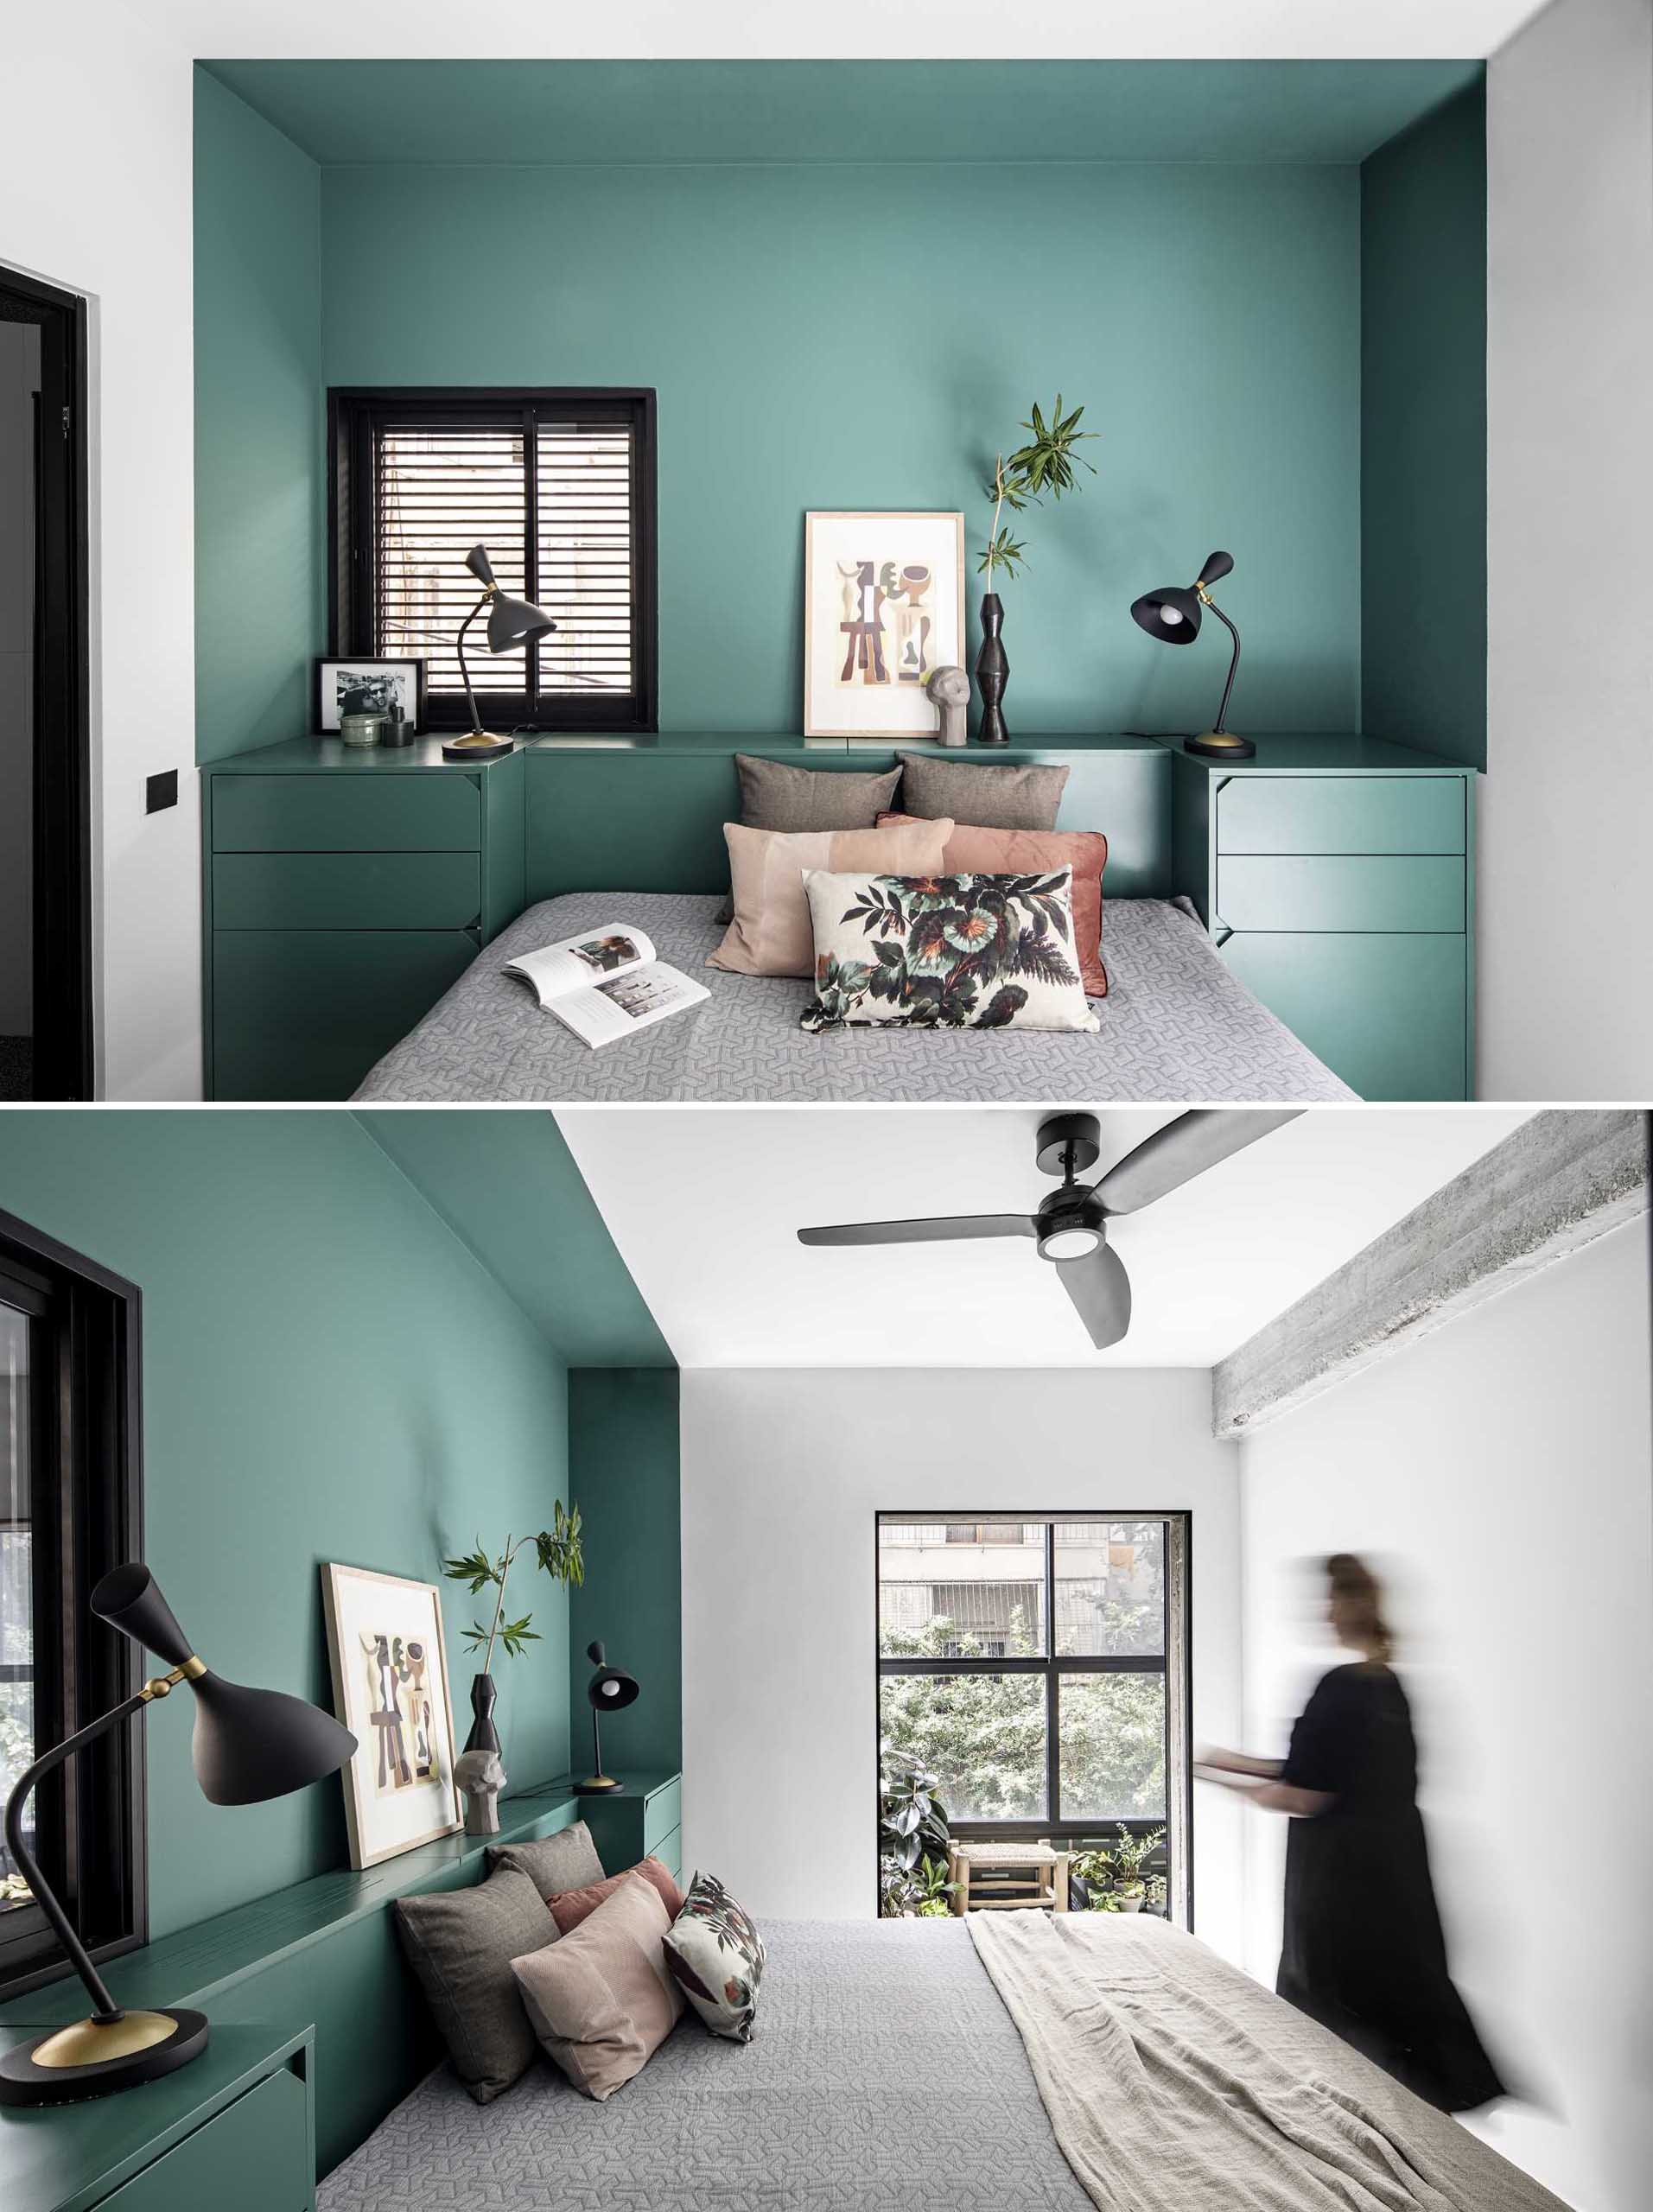 The primary bedroom has an evergreen-colored accent wall that also includes the bedside storage units and the framing of the bed, creating a cohesive look.